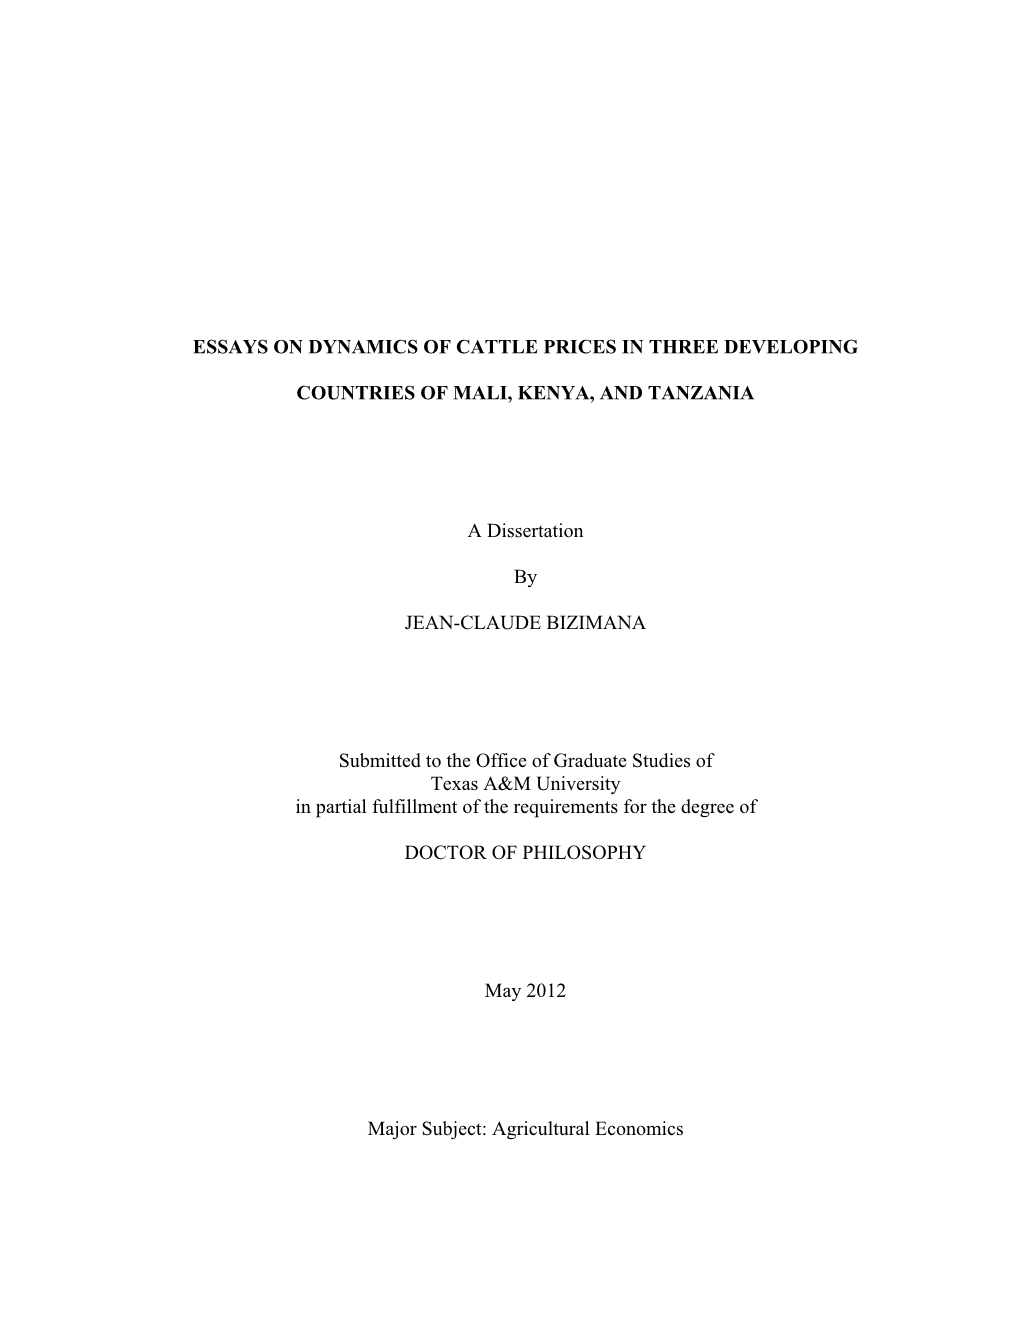 Essays on Dynamics of Cattle Prices in Three Developing